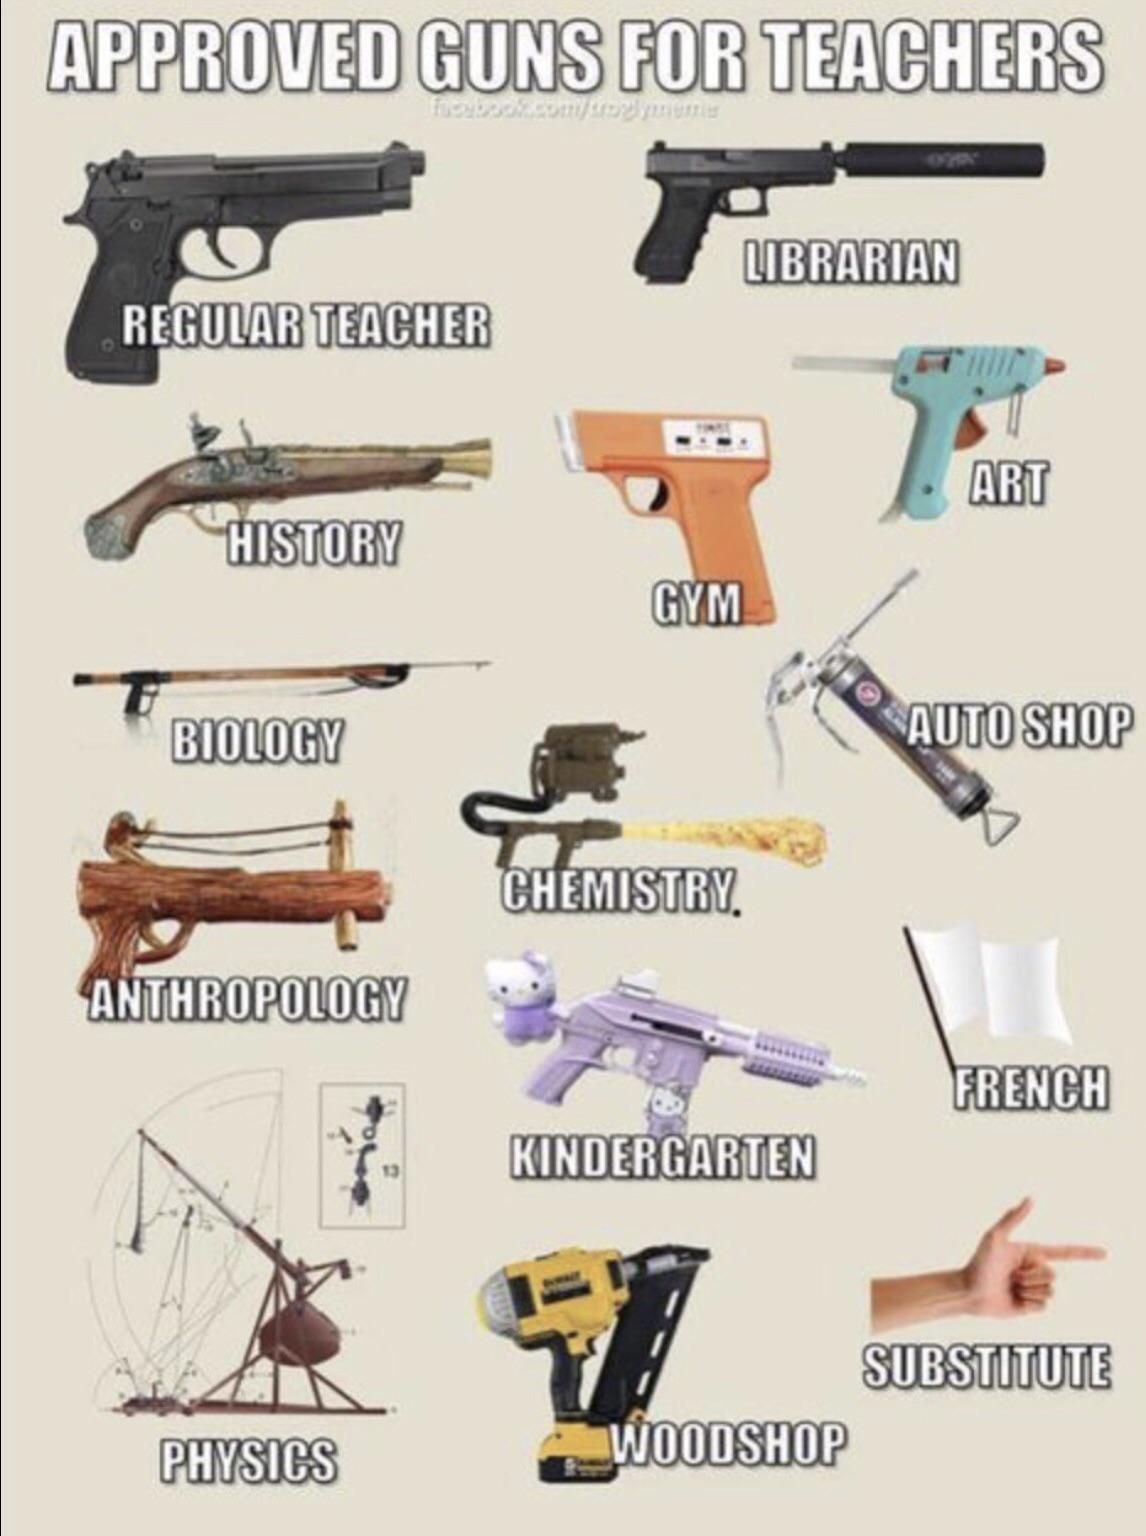 Approved guns for teachers by me